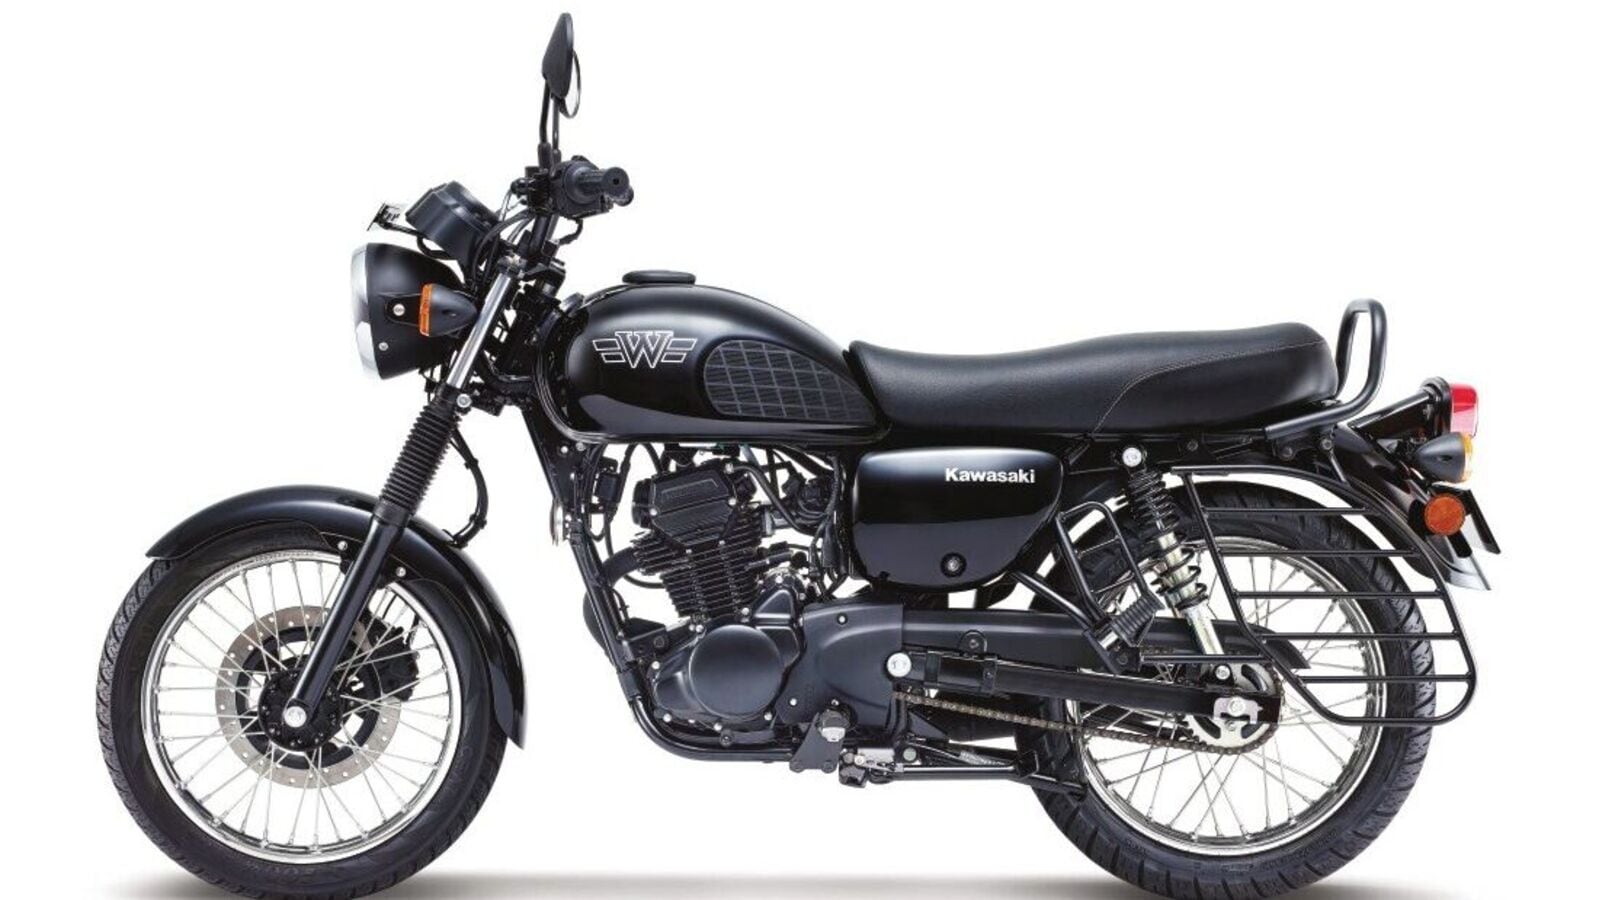 Kawasaki W175 launched at ₹1.47 lakh: Check price, specs, features